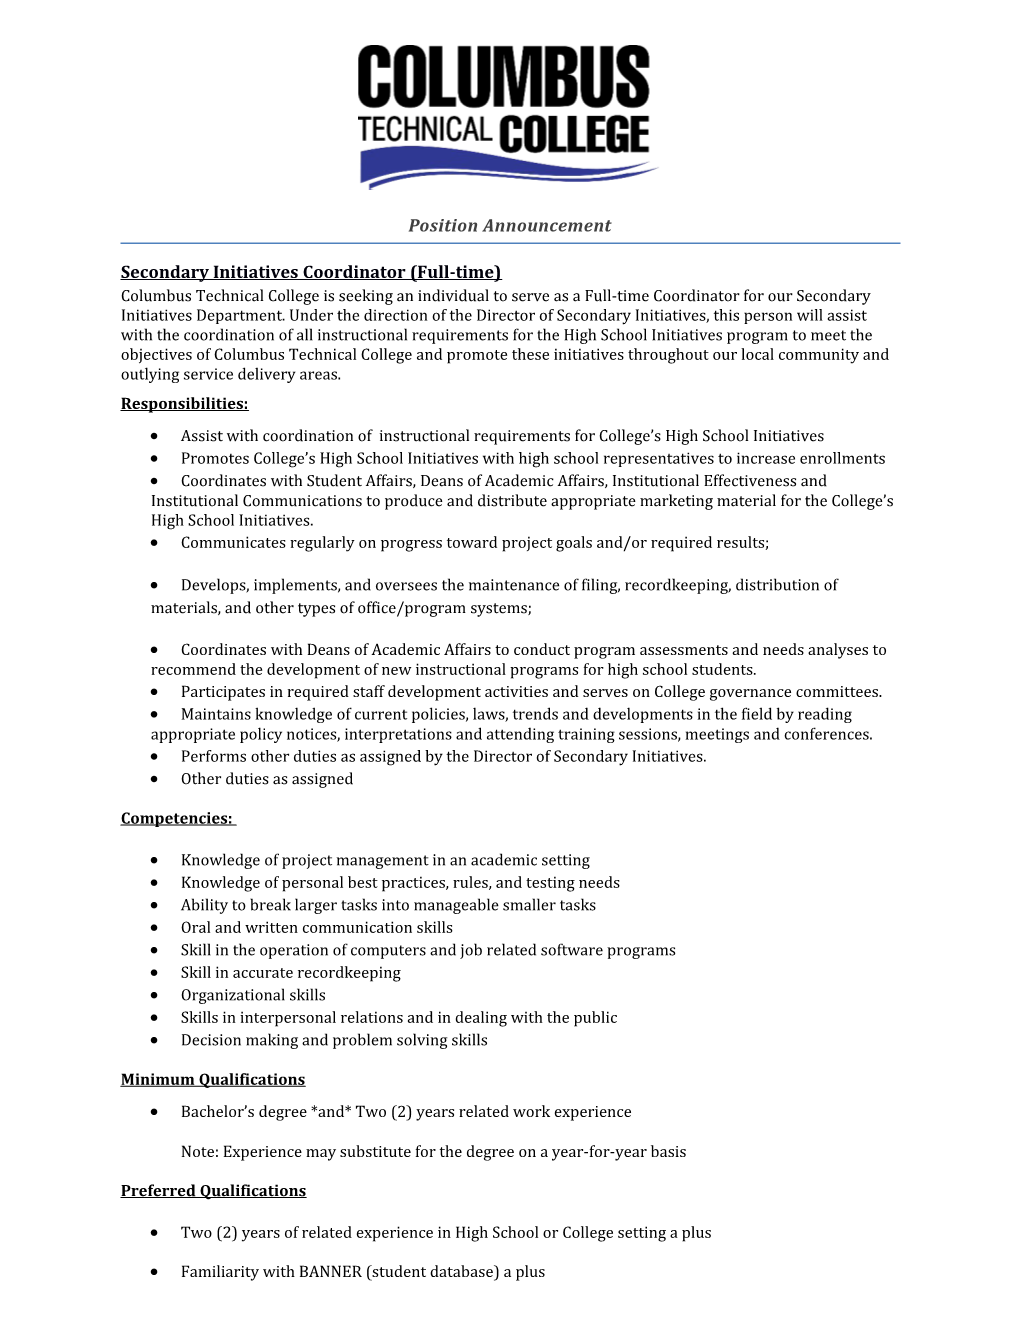 Secondary Initiatives Coordinator (Full-Time)